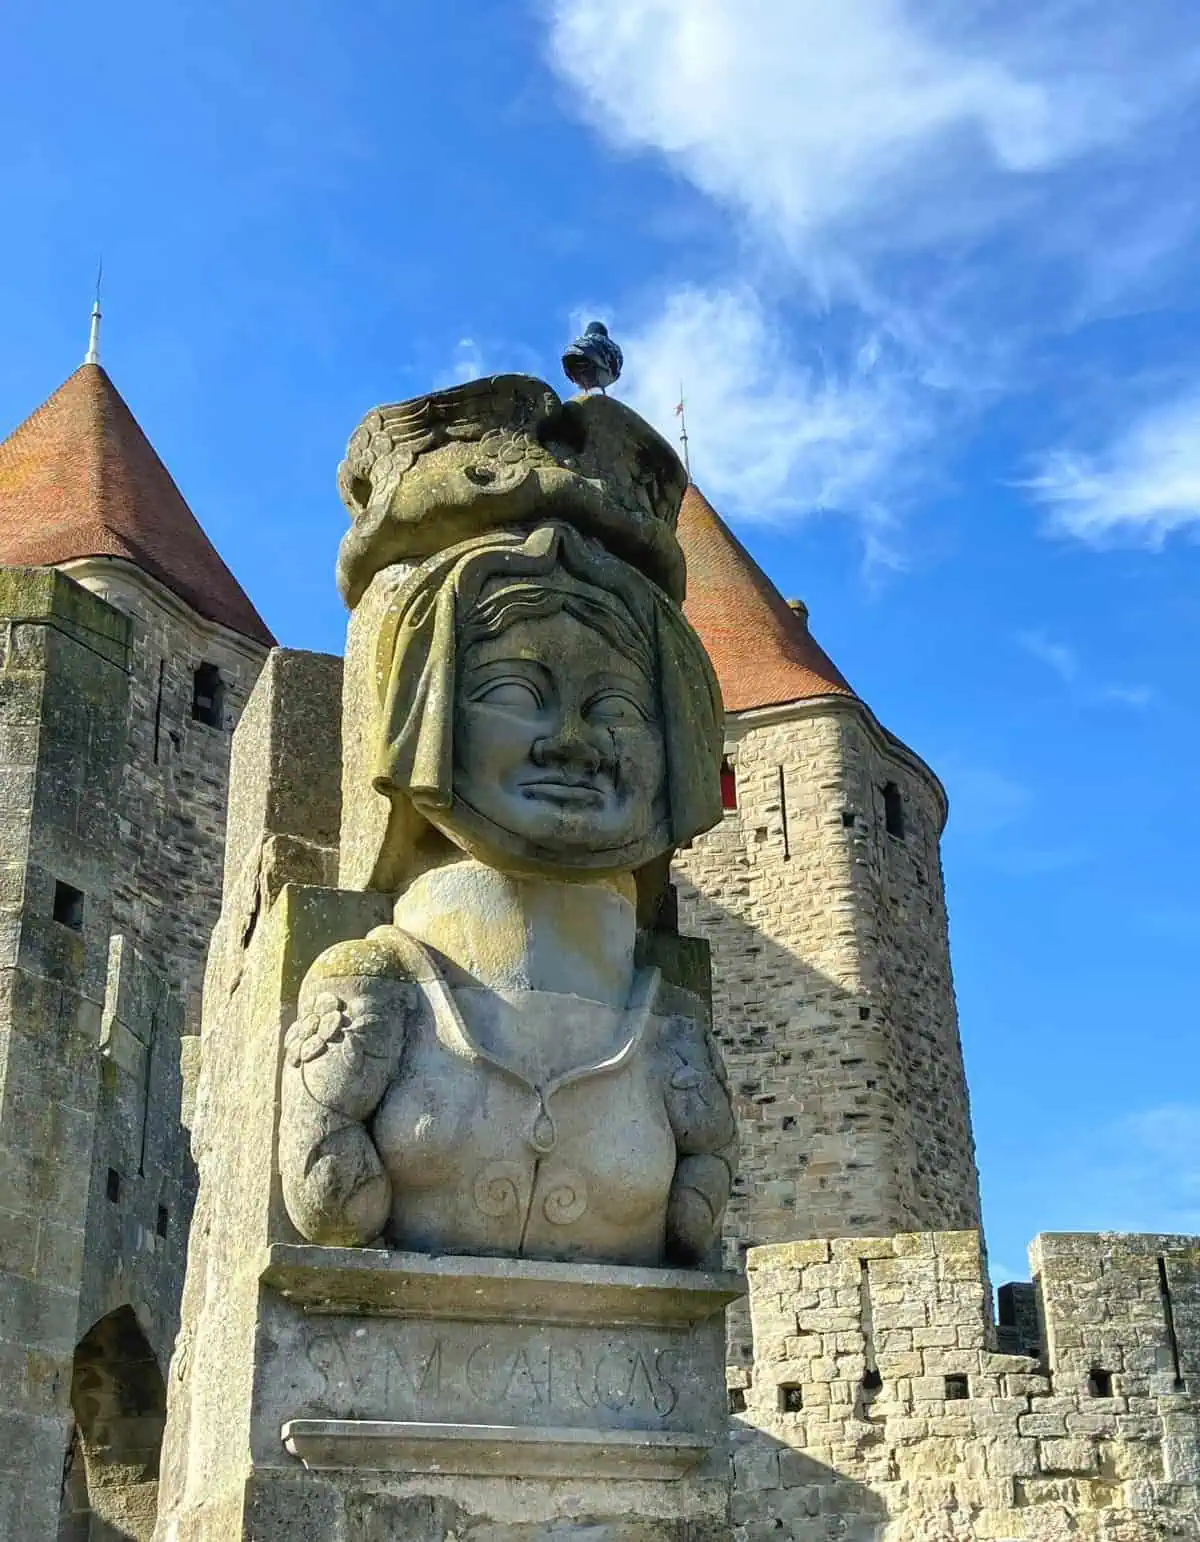 Bust of Dame Carcas on the Cite walls in Carcassonne